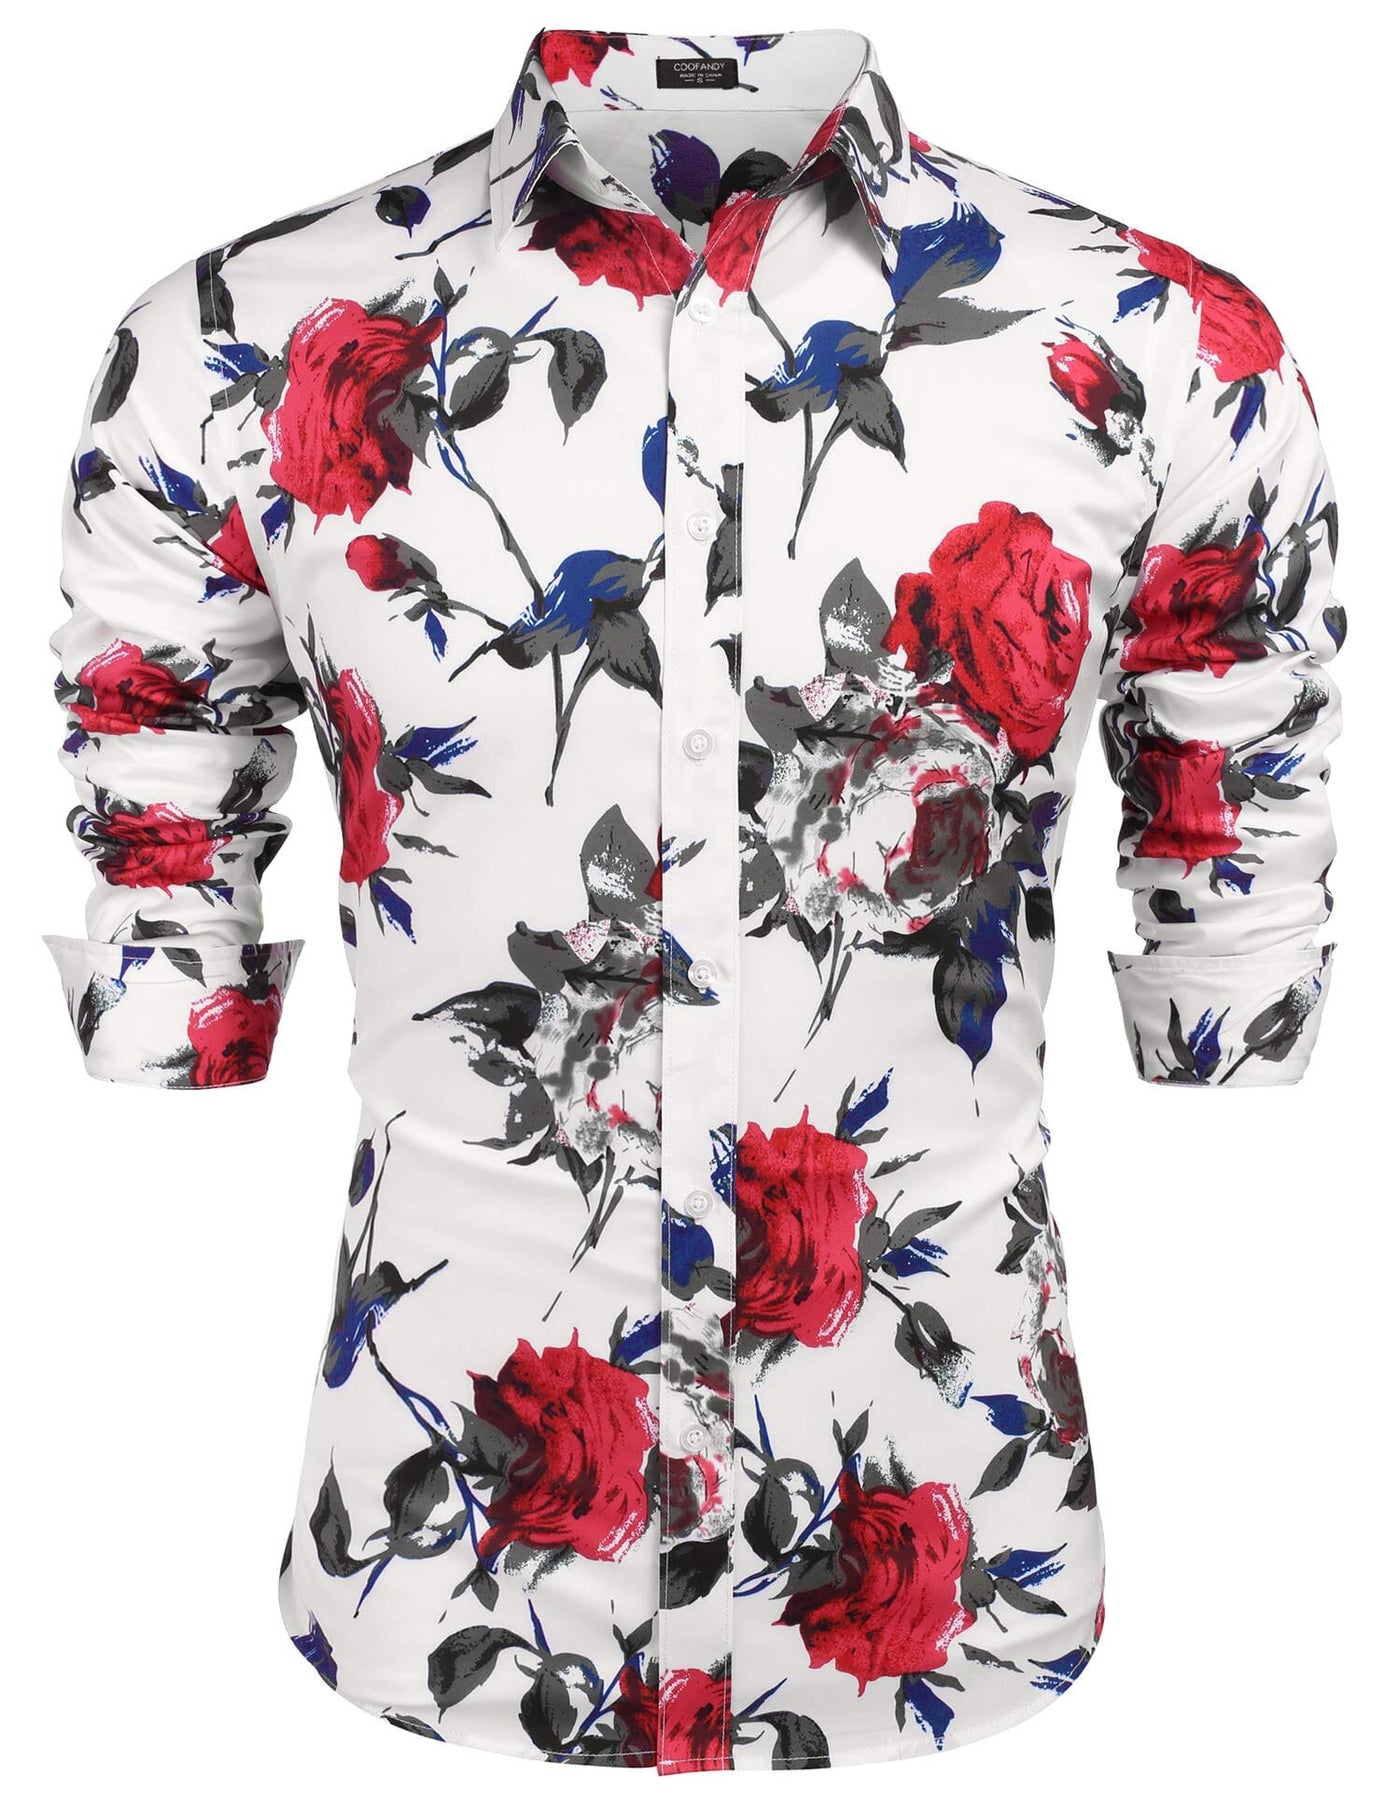 Floral Hawaiian Tropical Button Down Beach Shirt (US Only) Shirts coofandy White:red floral S 